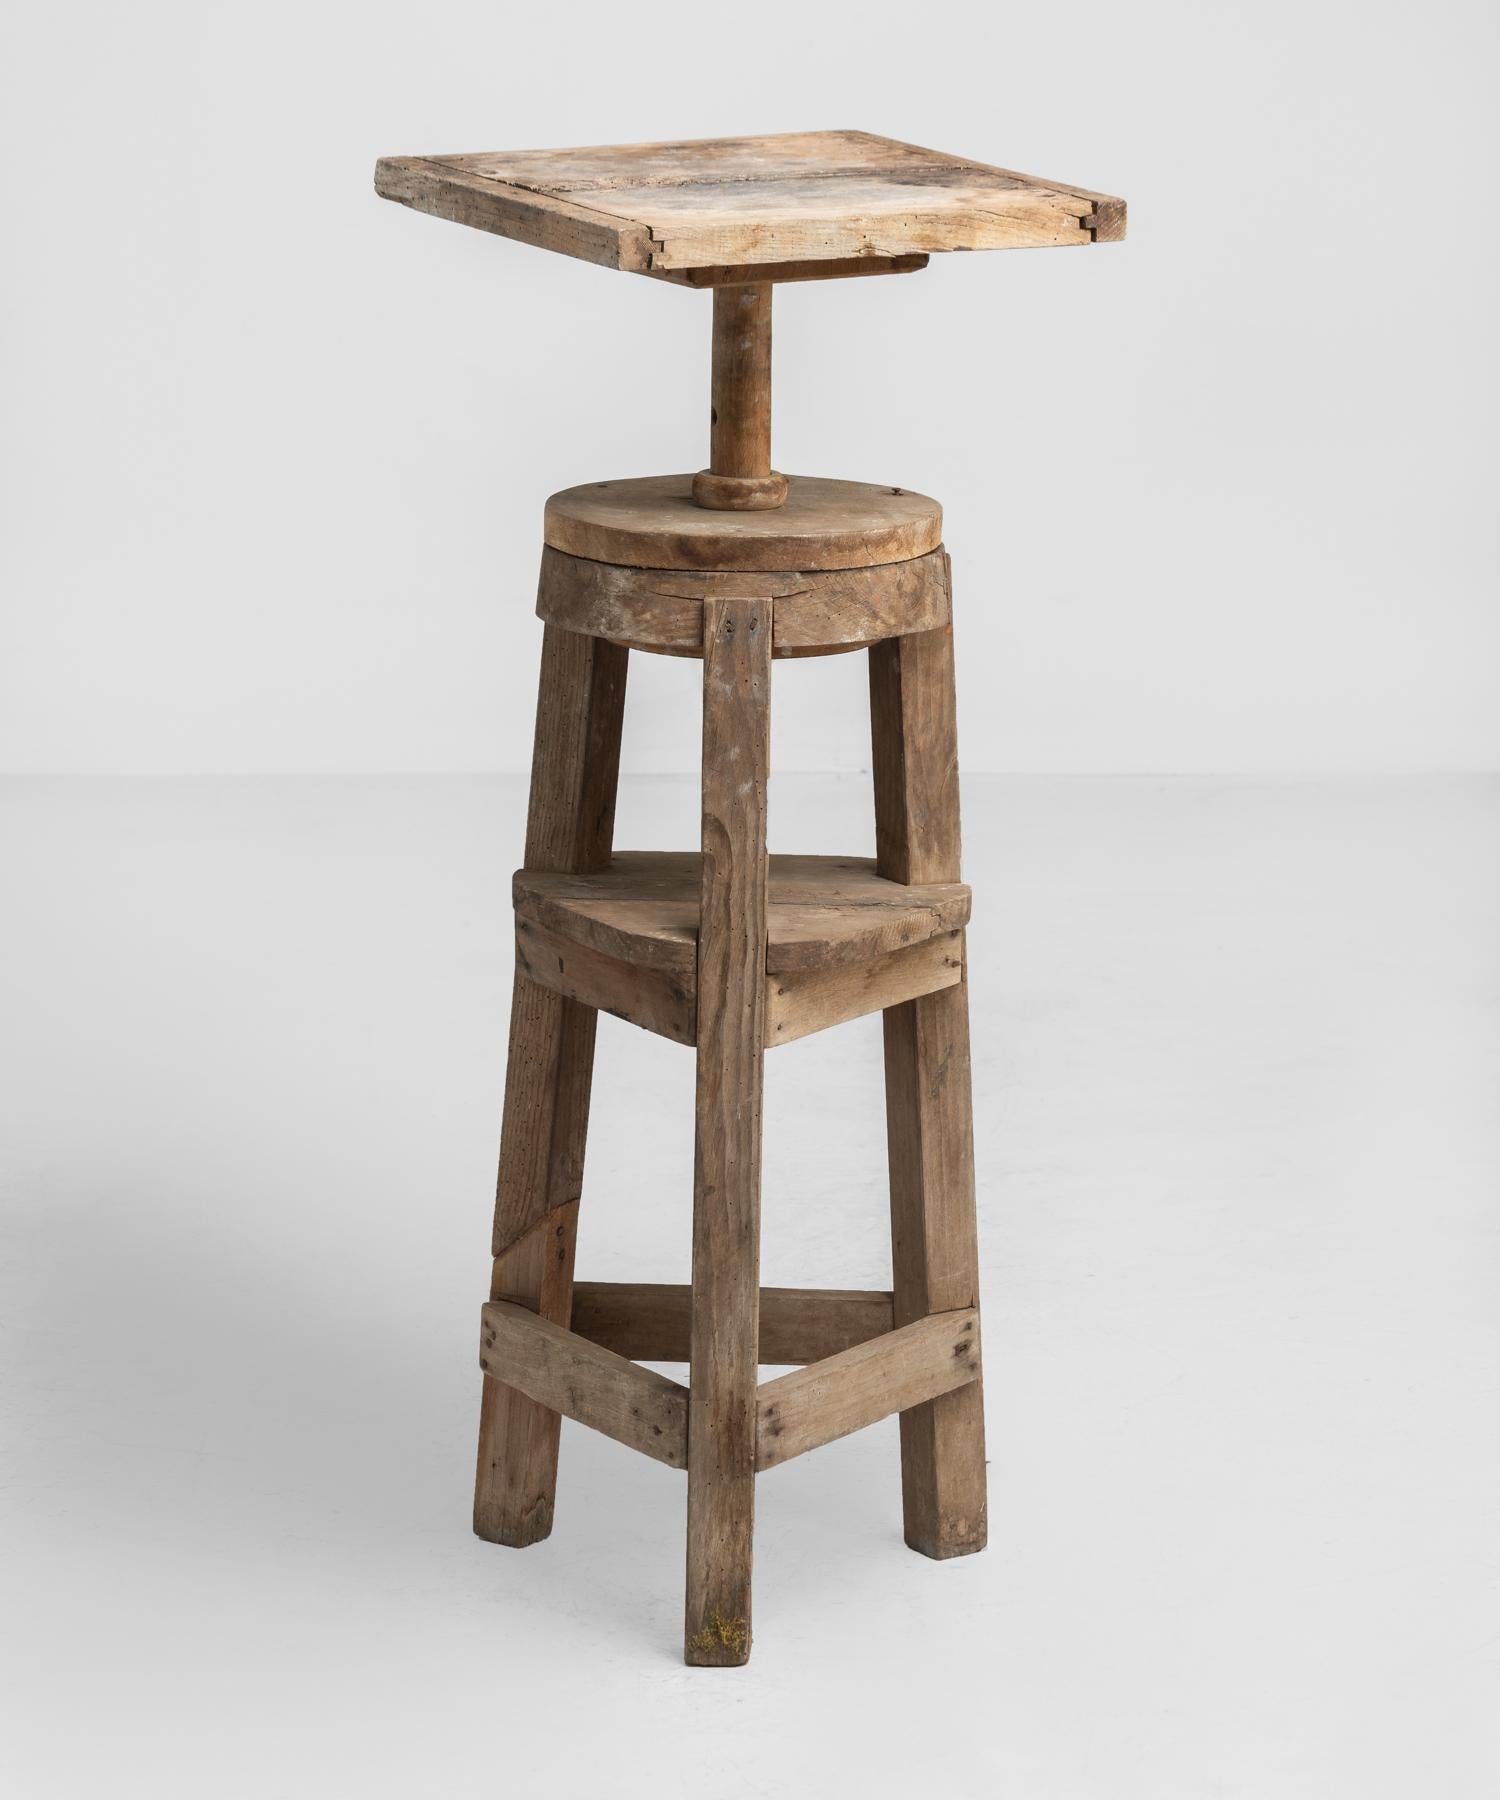 Pine sculpture stand, Italy, circa 1910

Solid pine construction with rotating top and adjustable height.